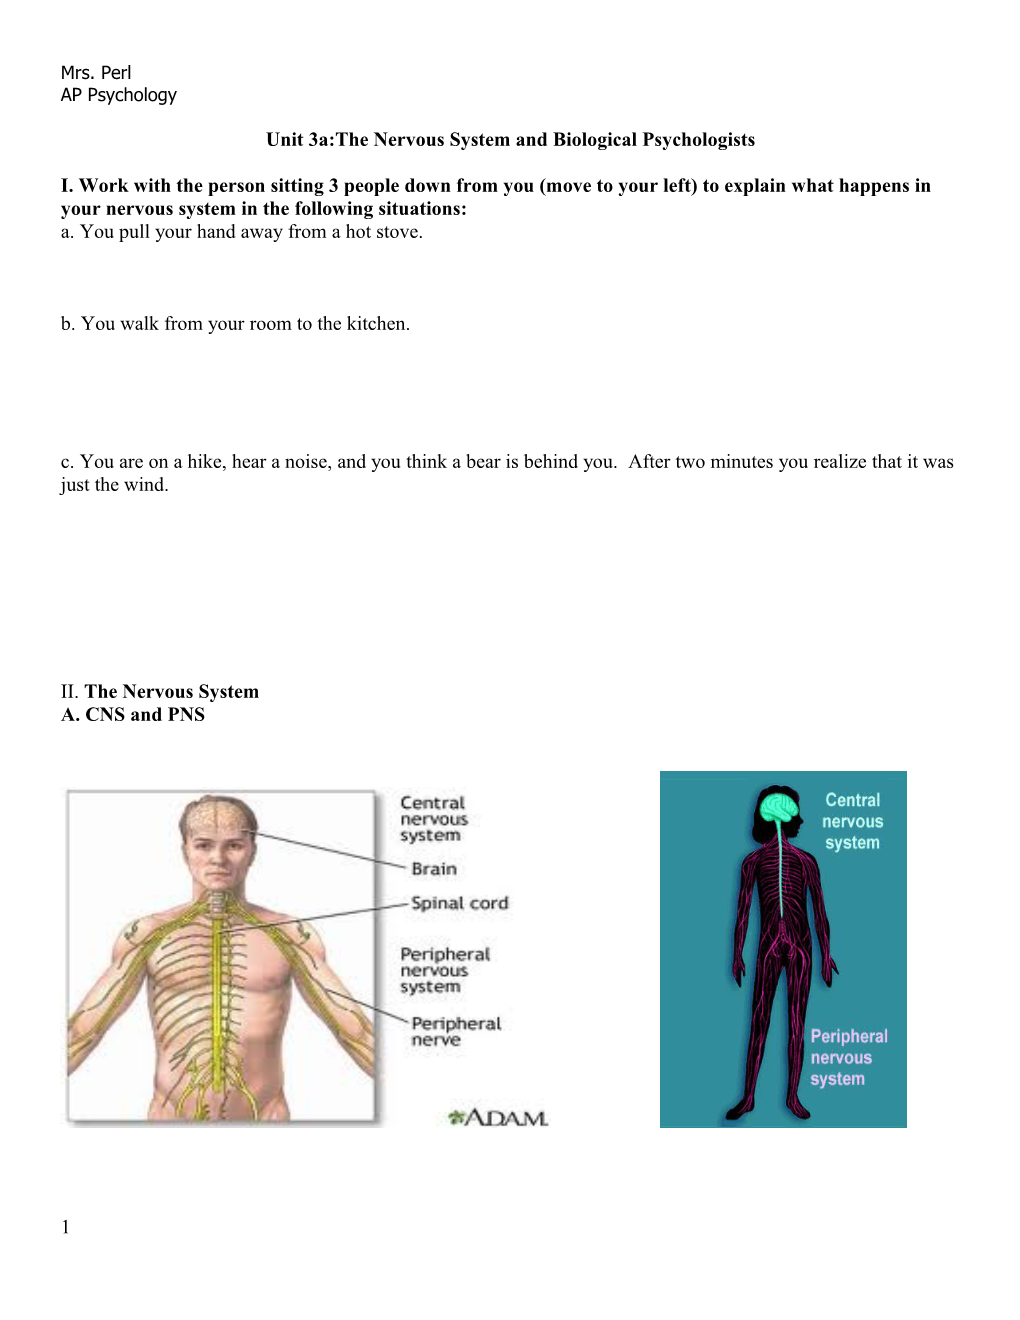 Unit 3A:The Nervous System and Biological Psychologists